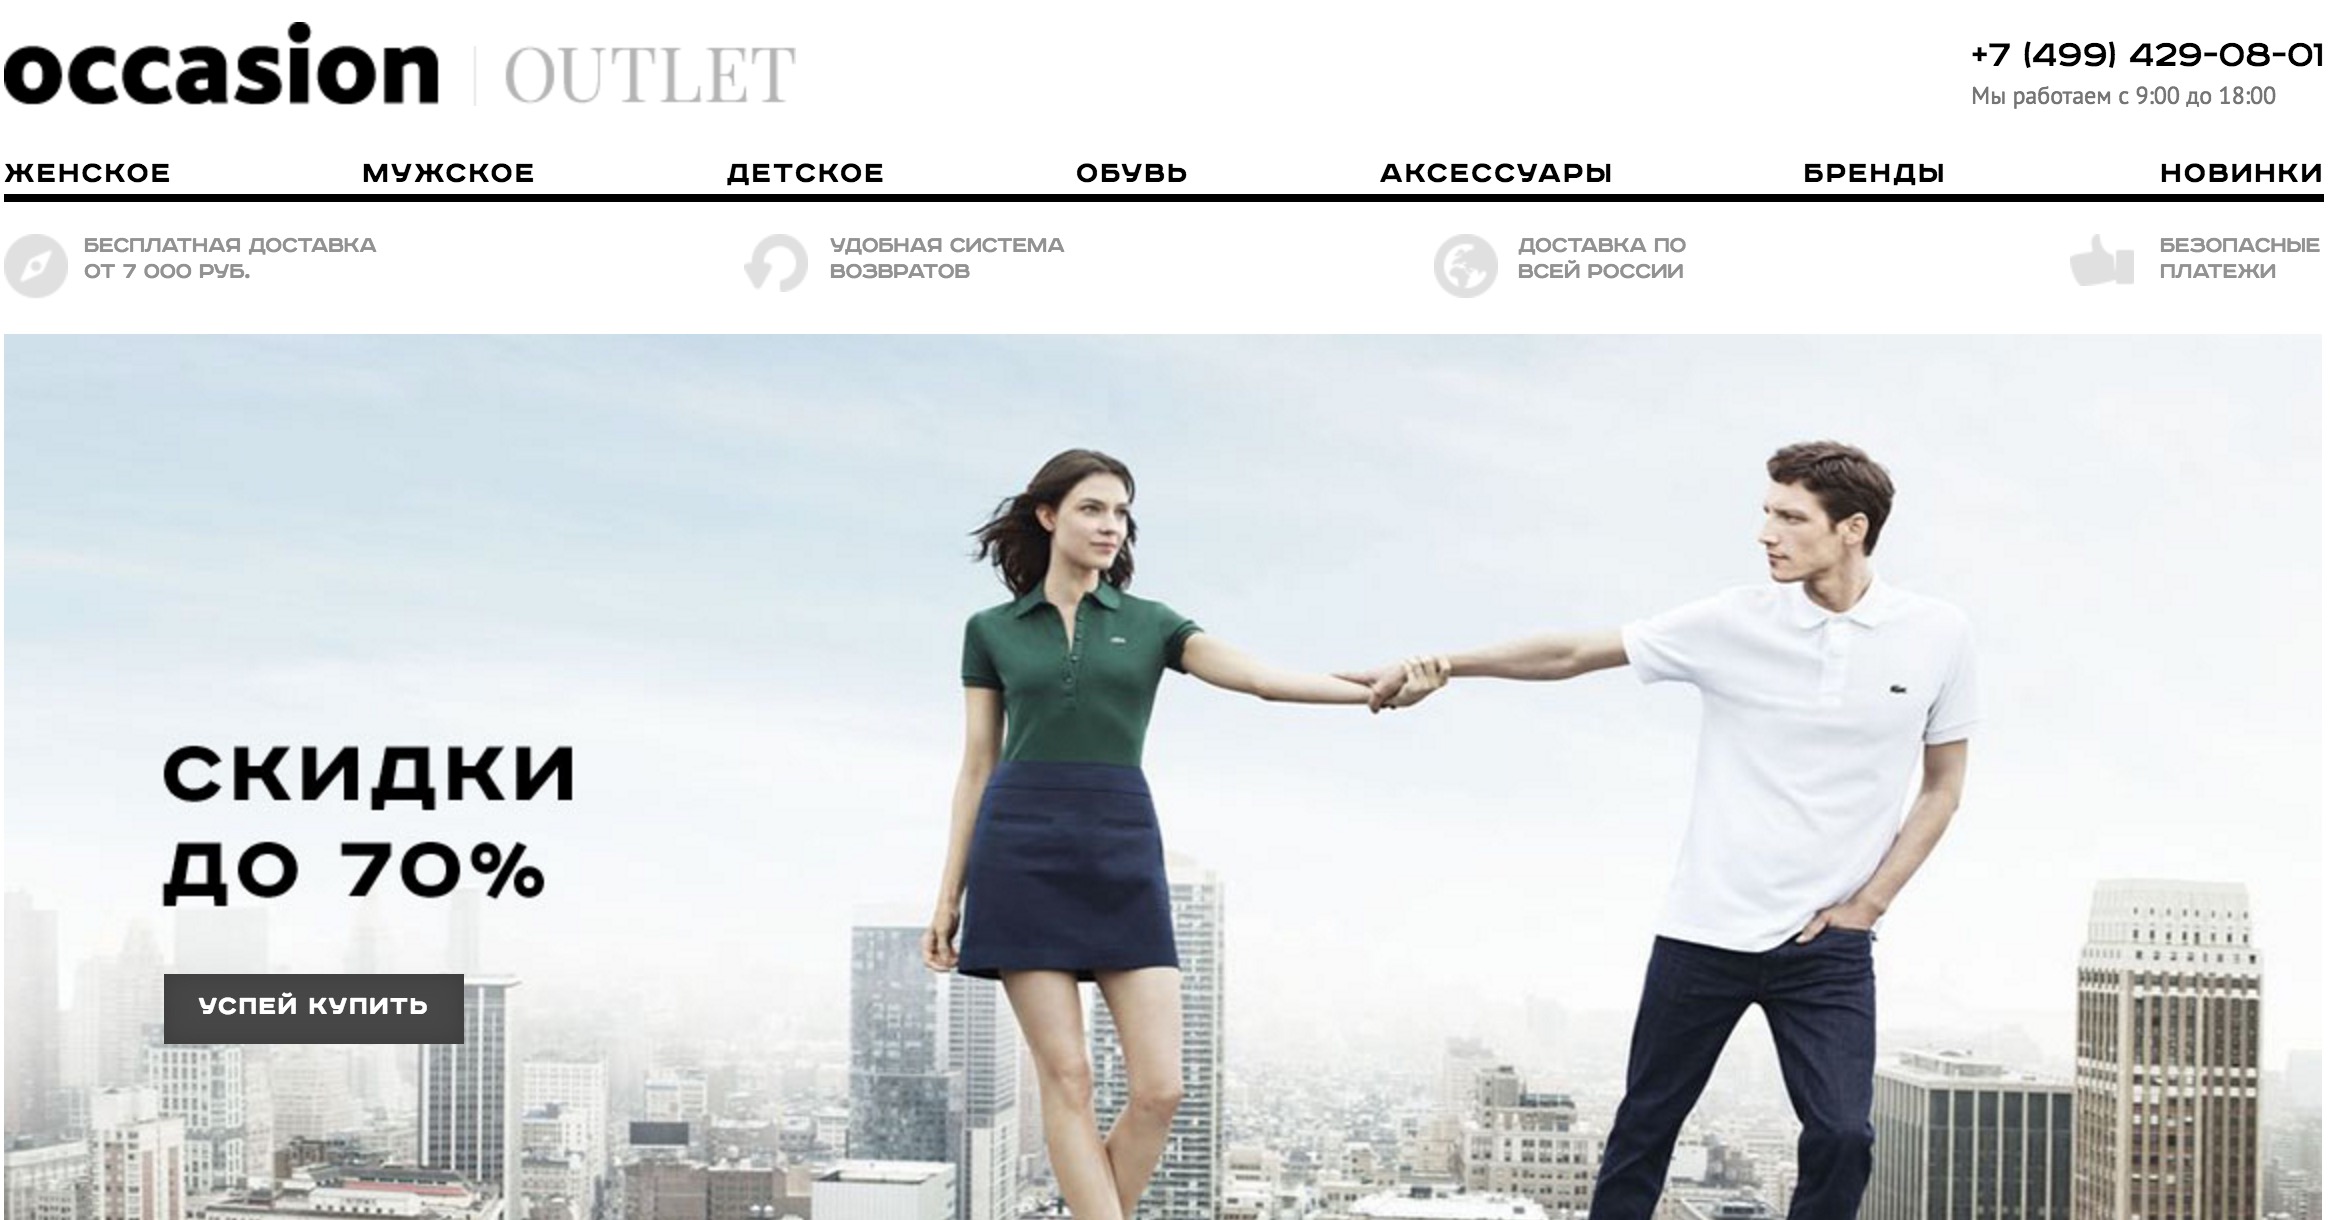 Outlets com. Occasion. Occasion Outlet. Бабочка аутлет интернет. Outlet перевод на русский.